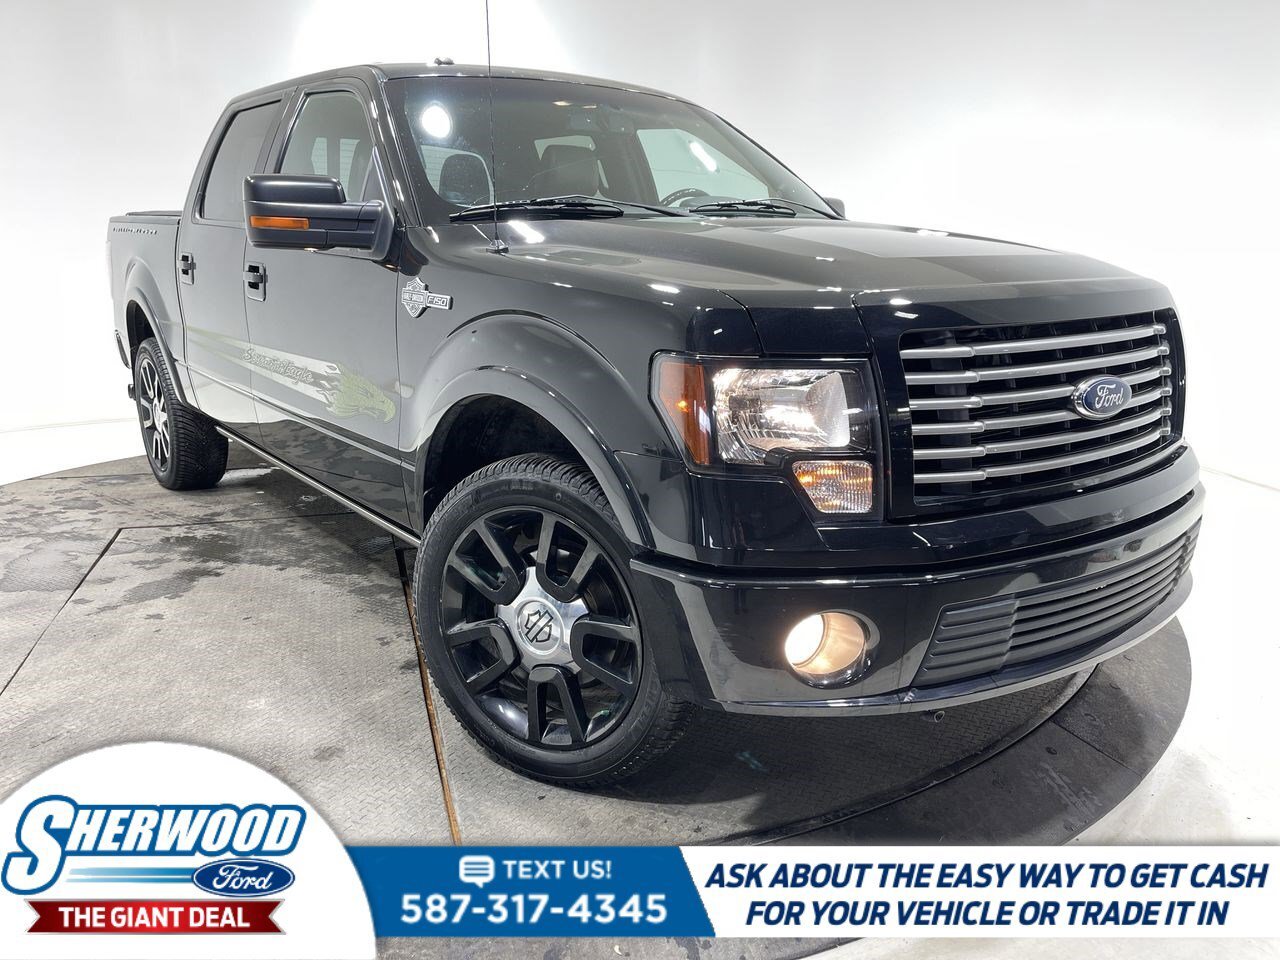 2011 Ford F-150 Harley Davidson - MOONROOF - LEATHER